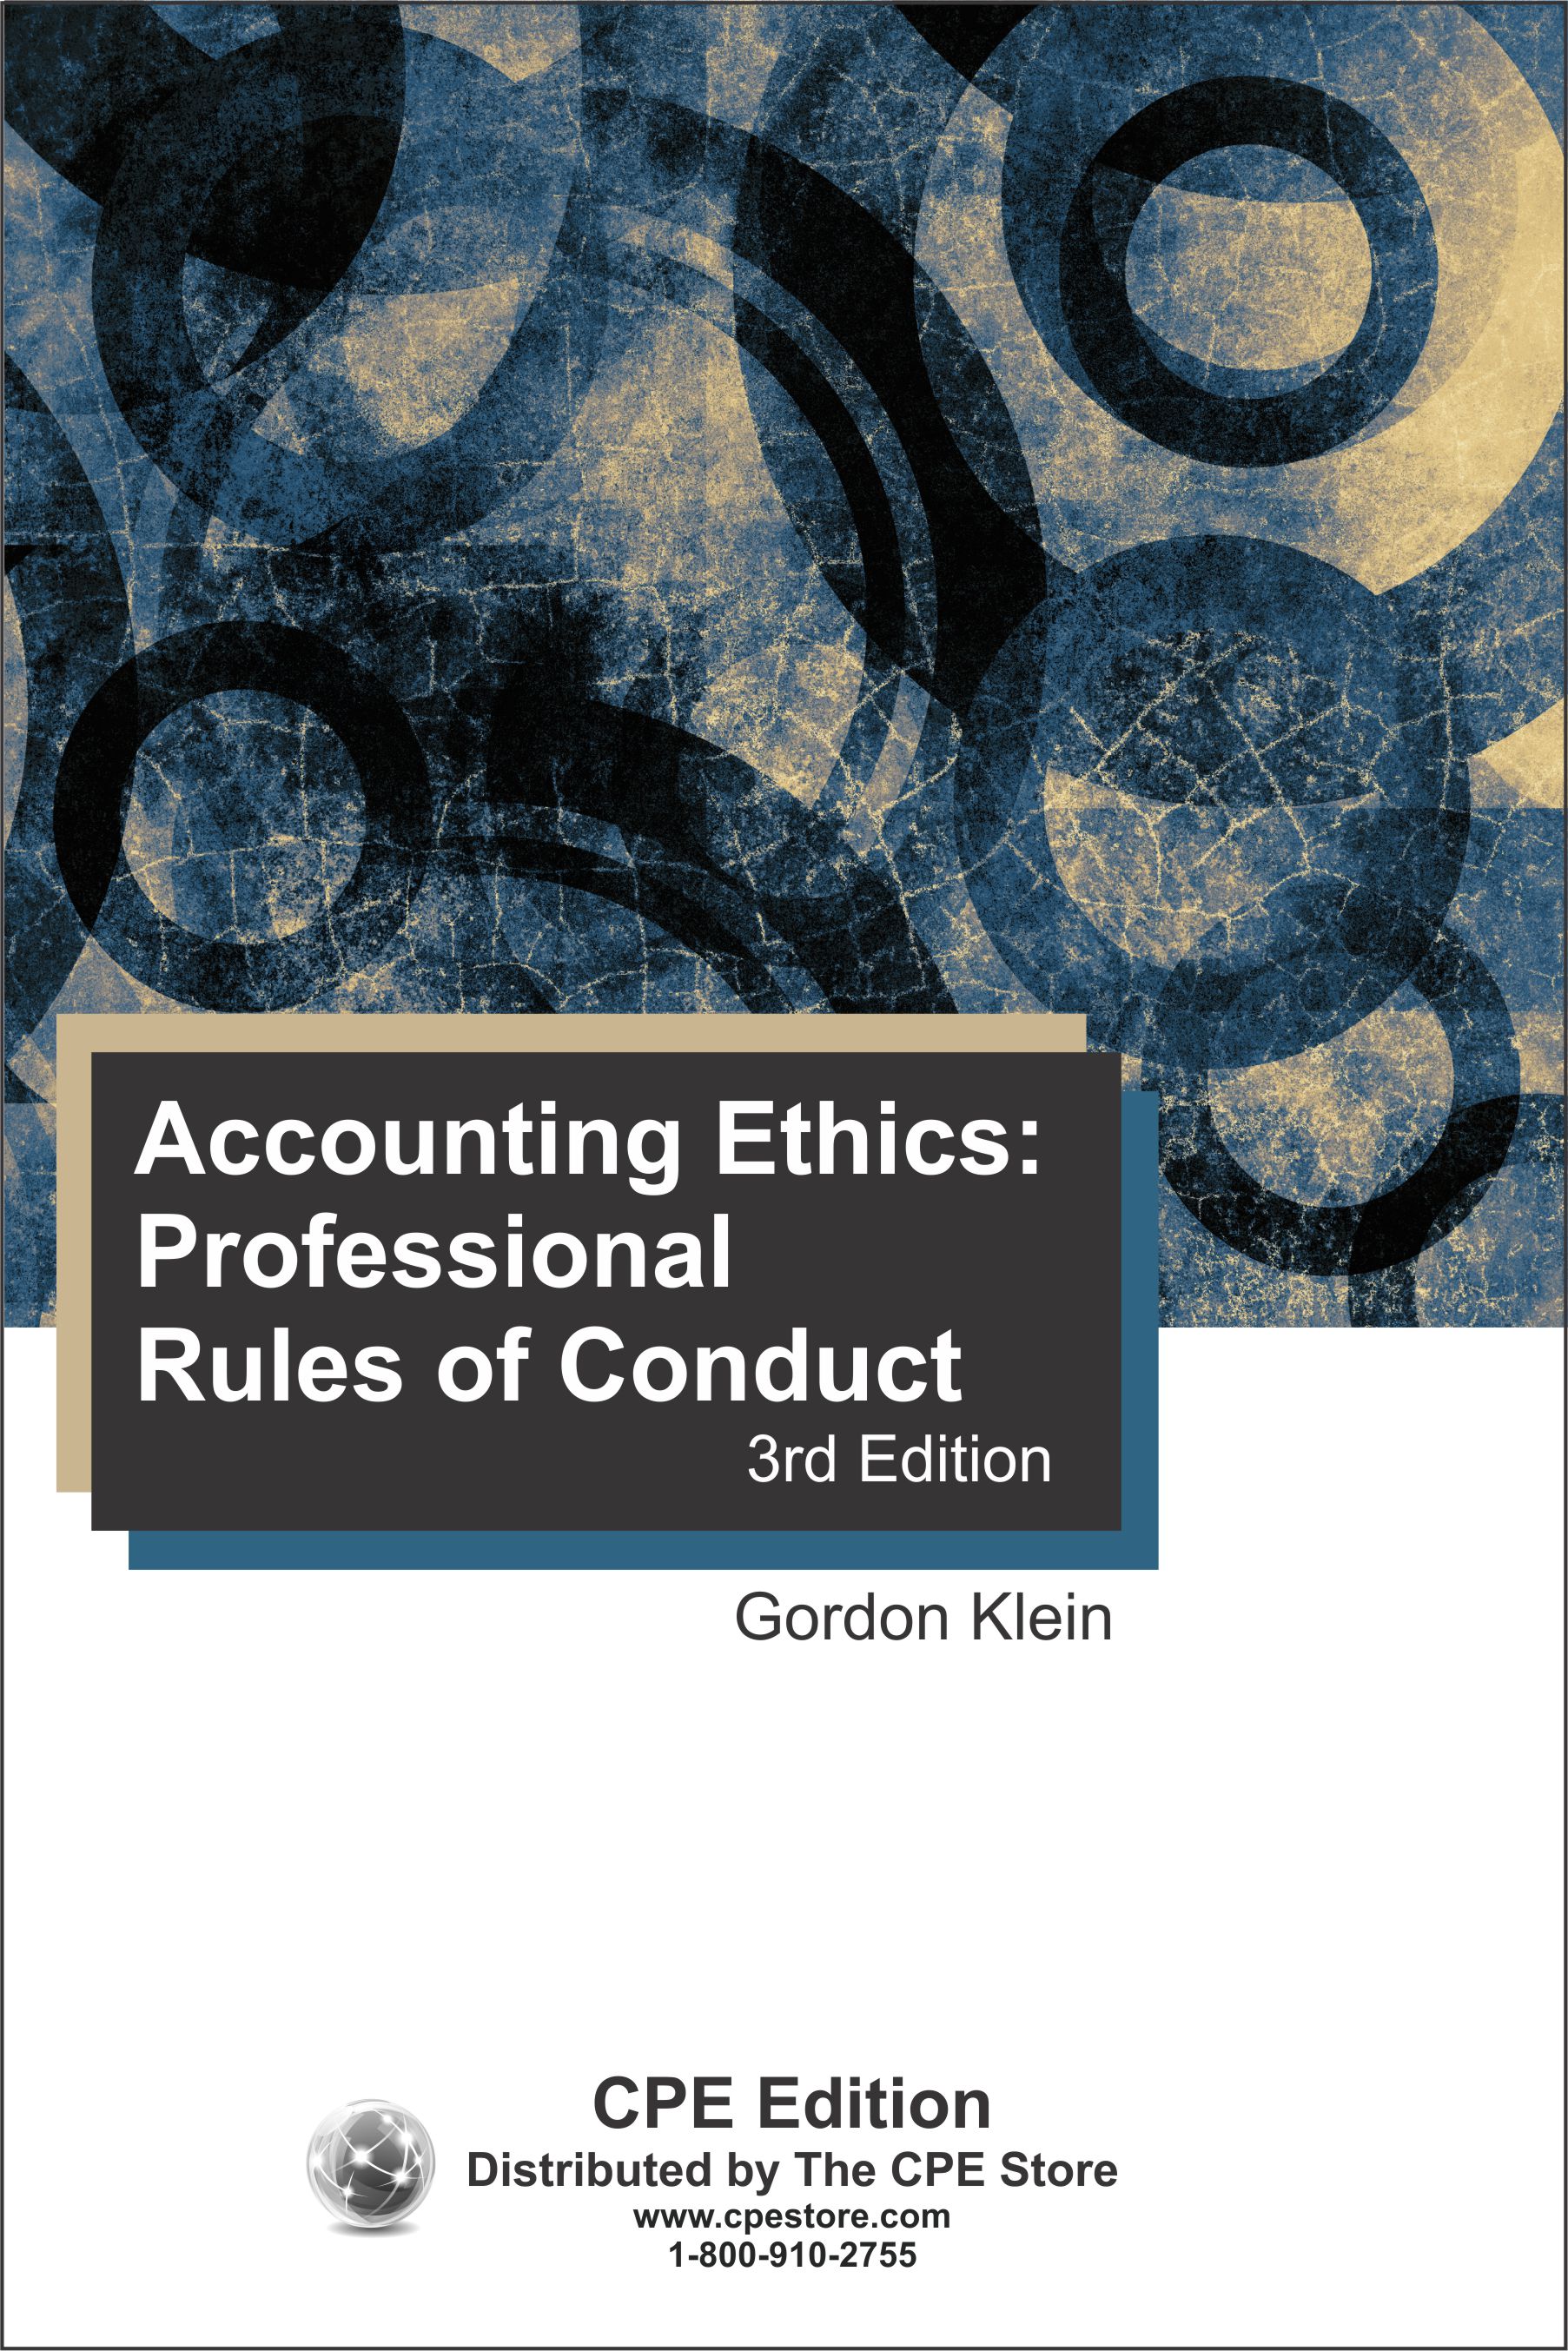 Accounting Ethics: Professional Rules of Conduct